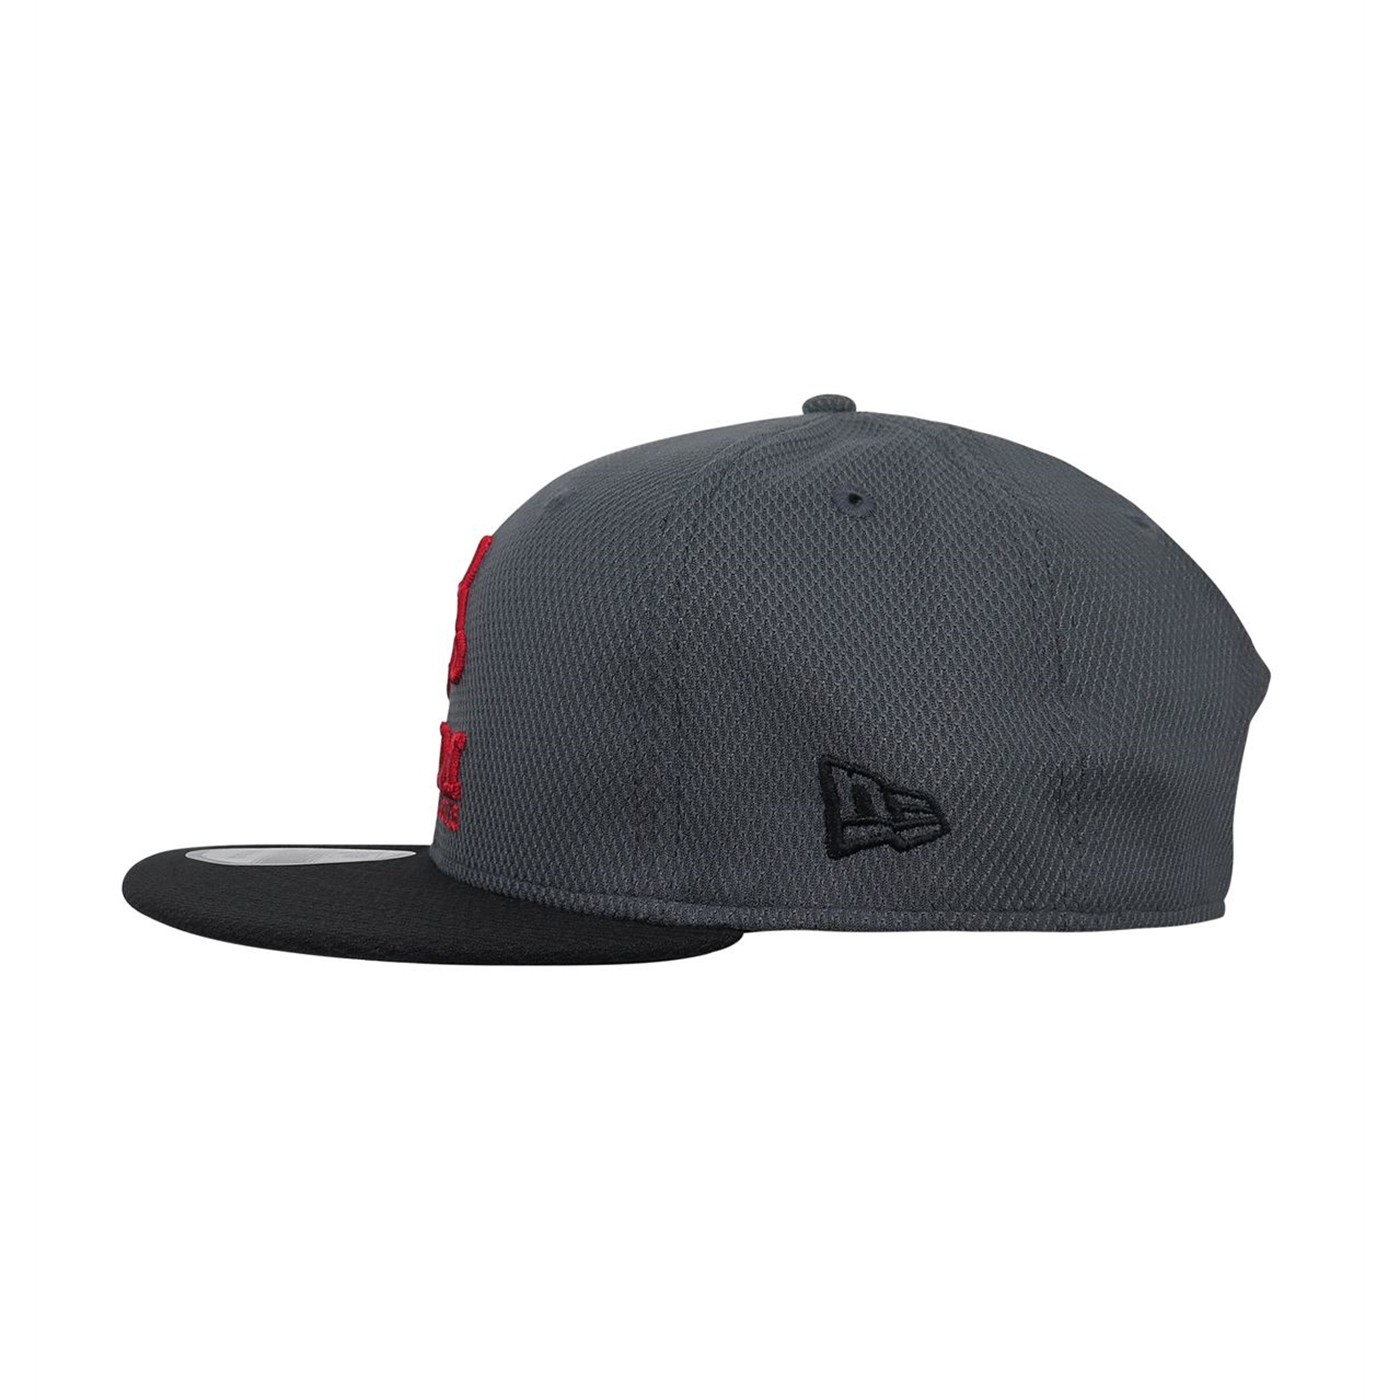 Ant-Man Pym Tech 9Fifty Adjustable Hat